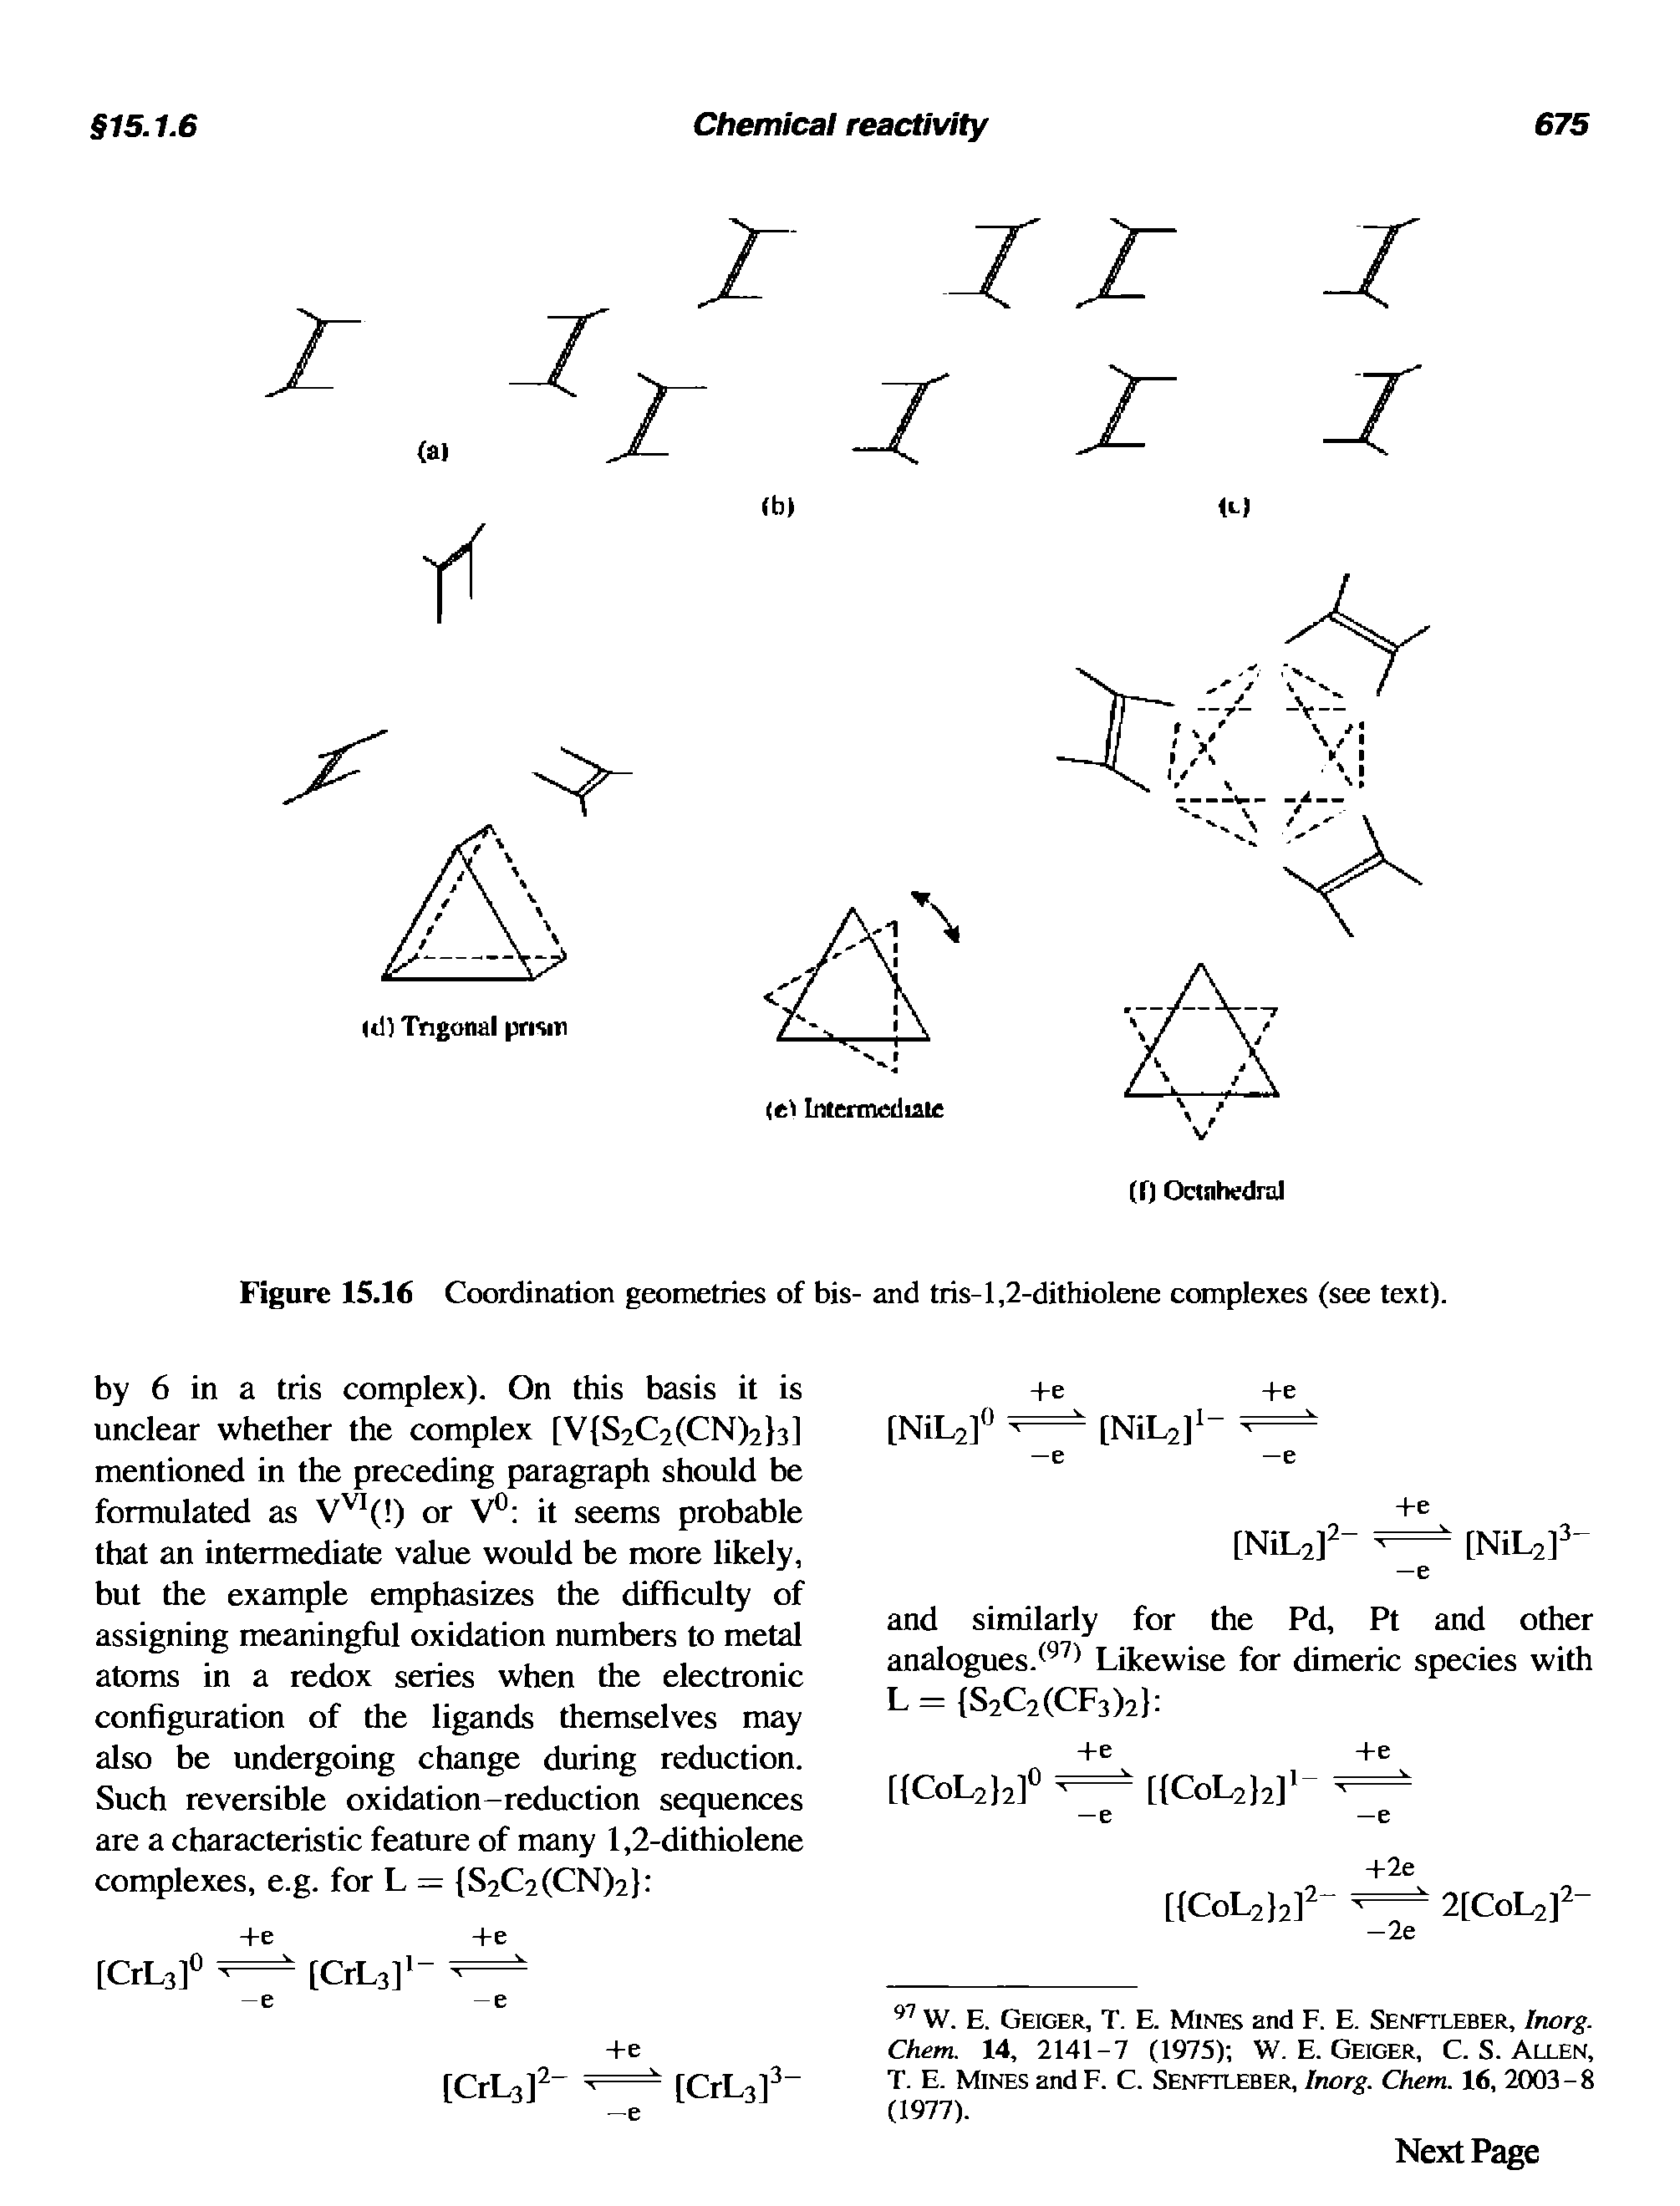 Figure 15.16 Coordination geometries of bis- and tris-l,2-dithiolene complexes (see text).